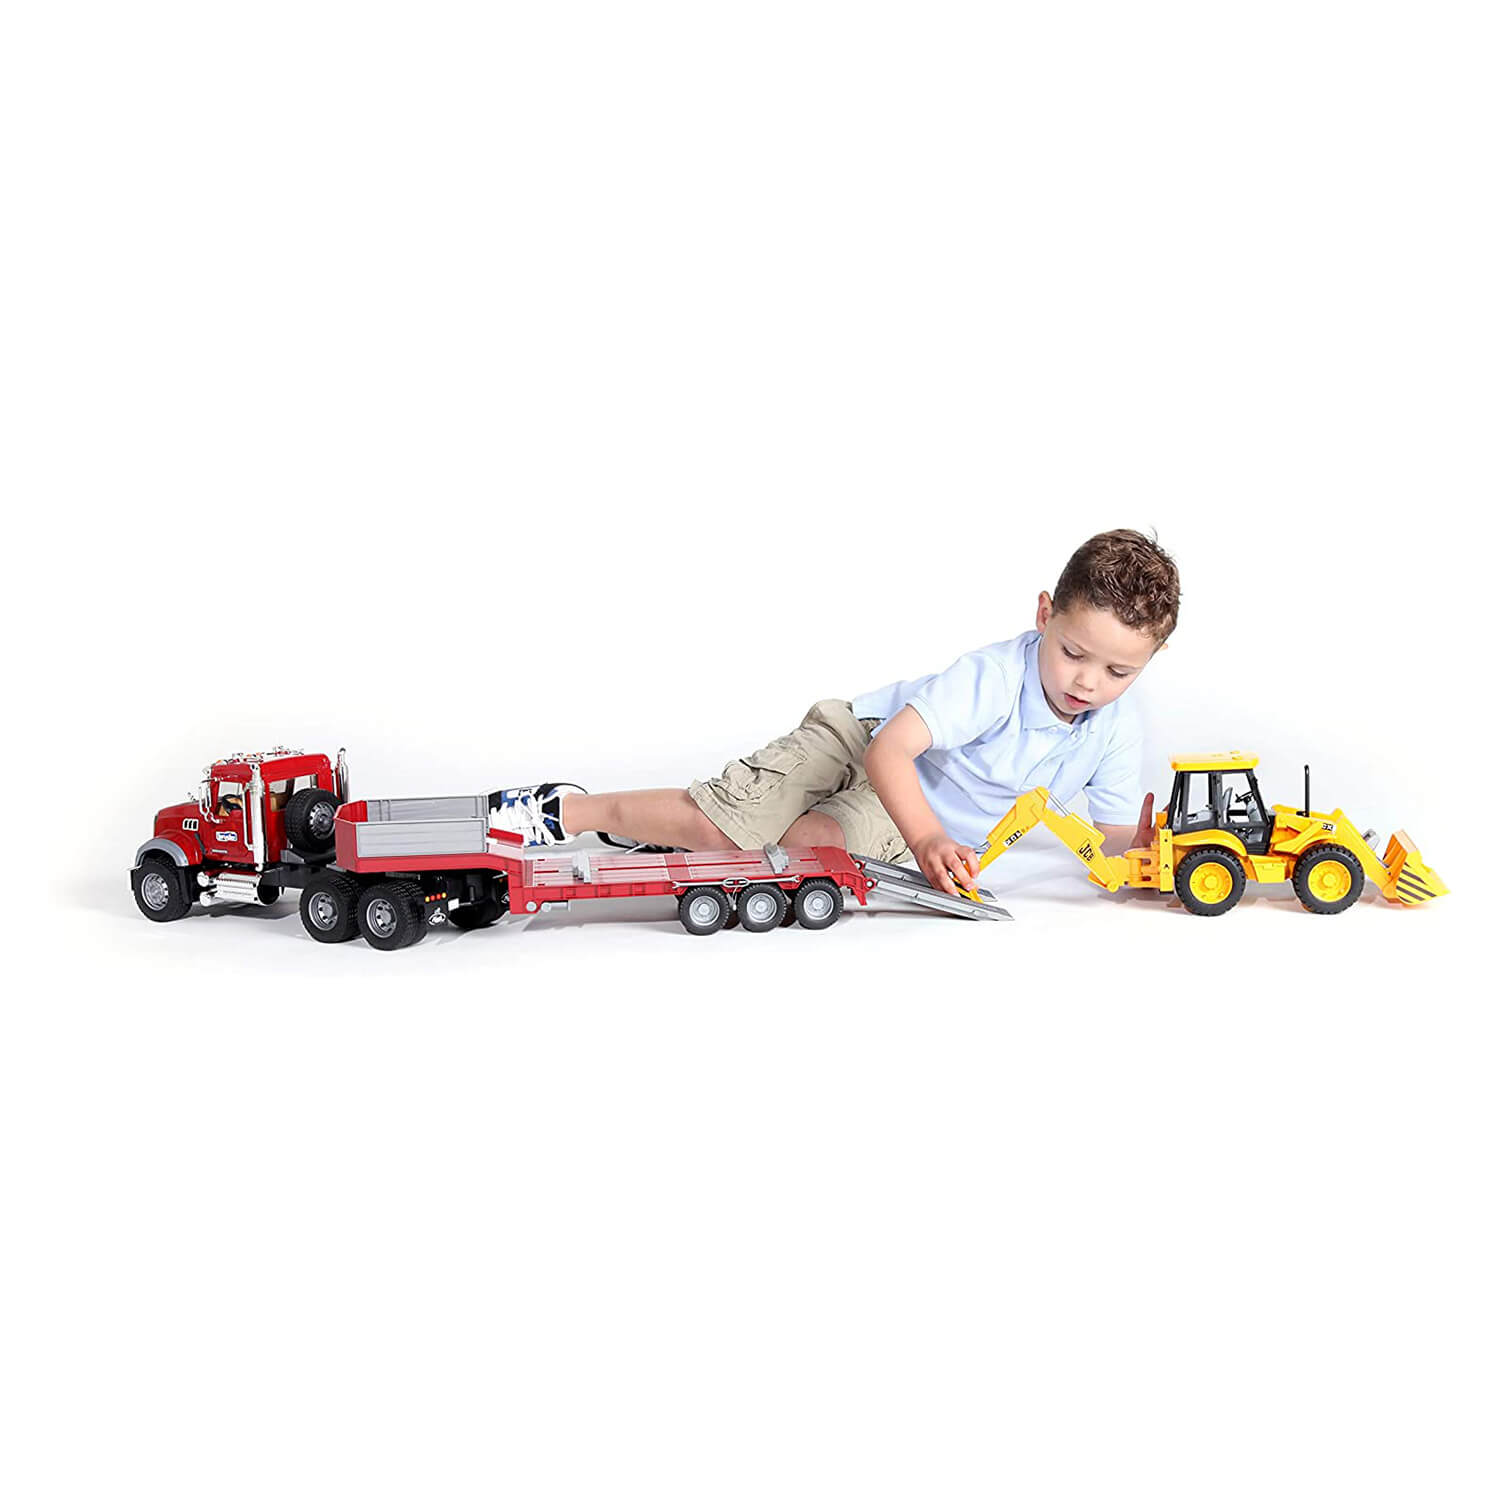 Kid playing with the truck toy.